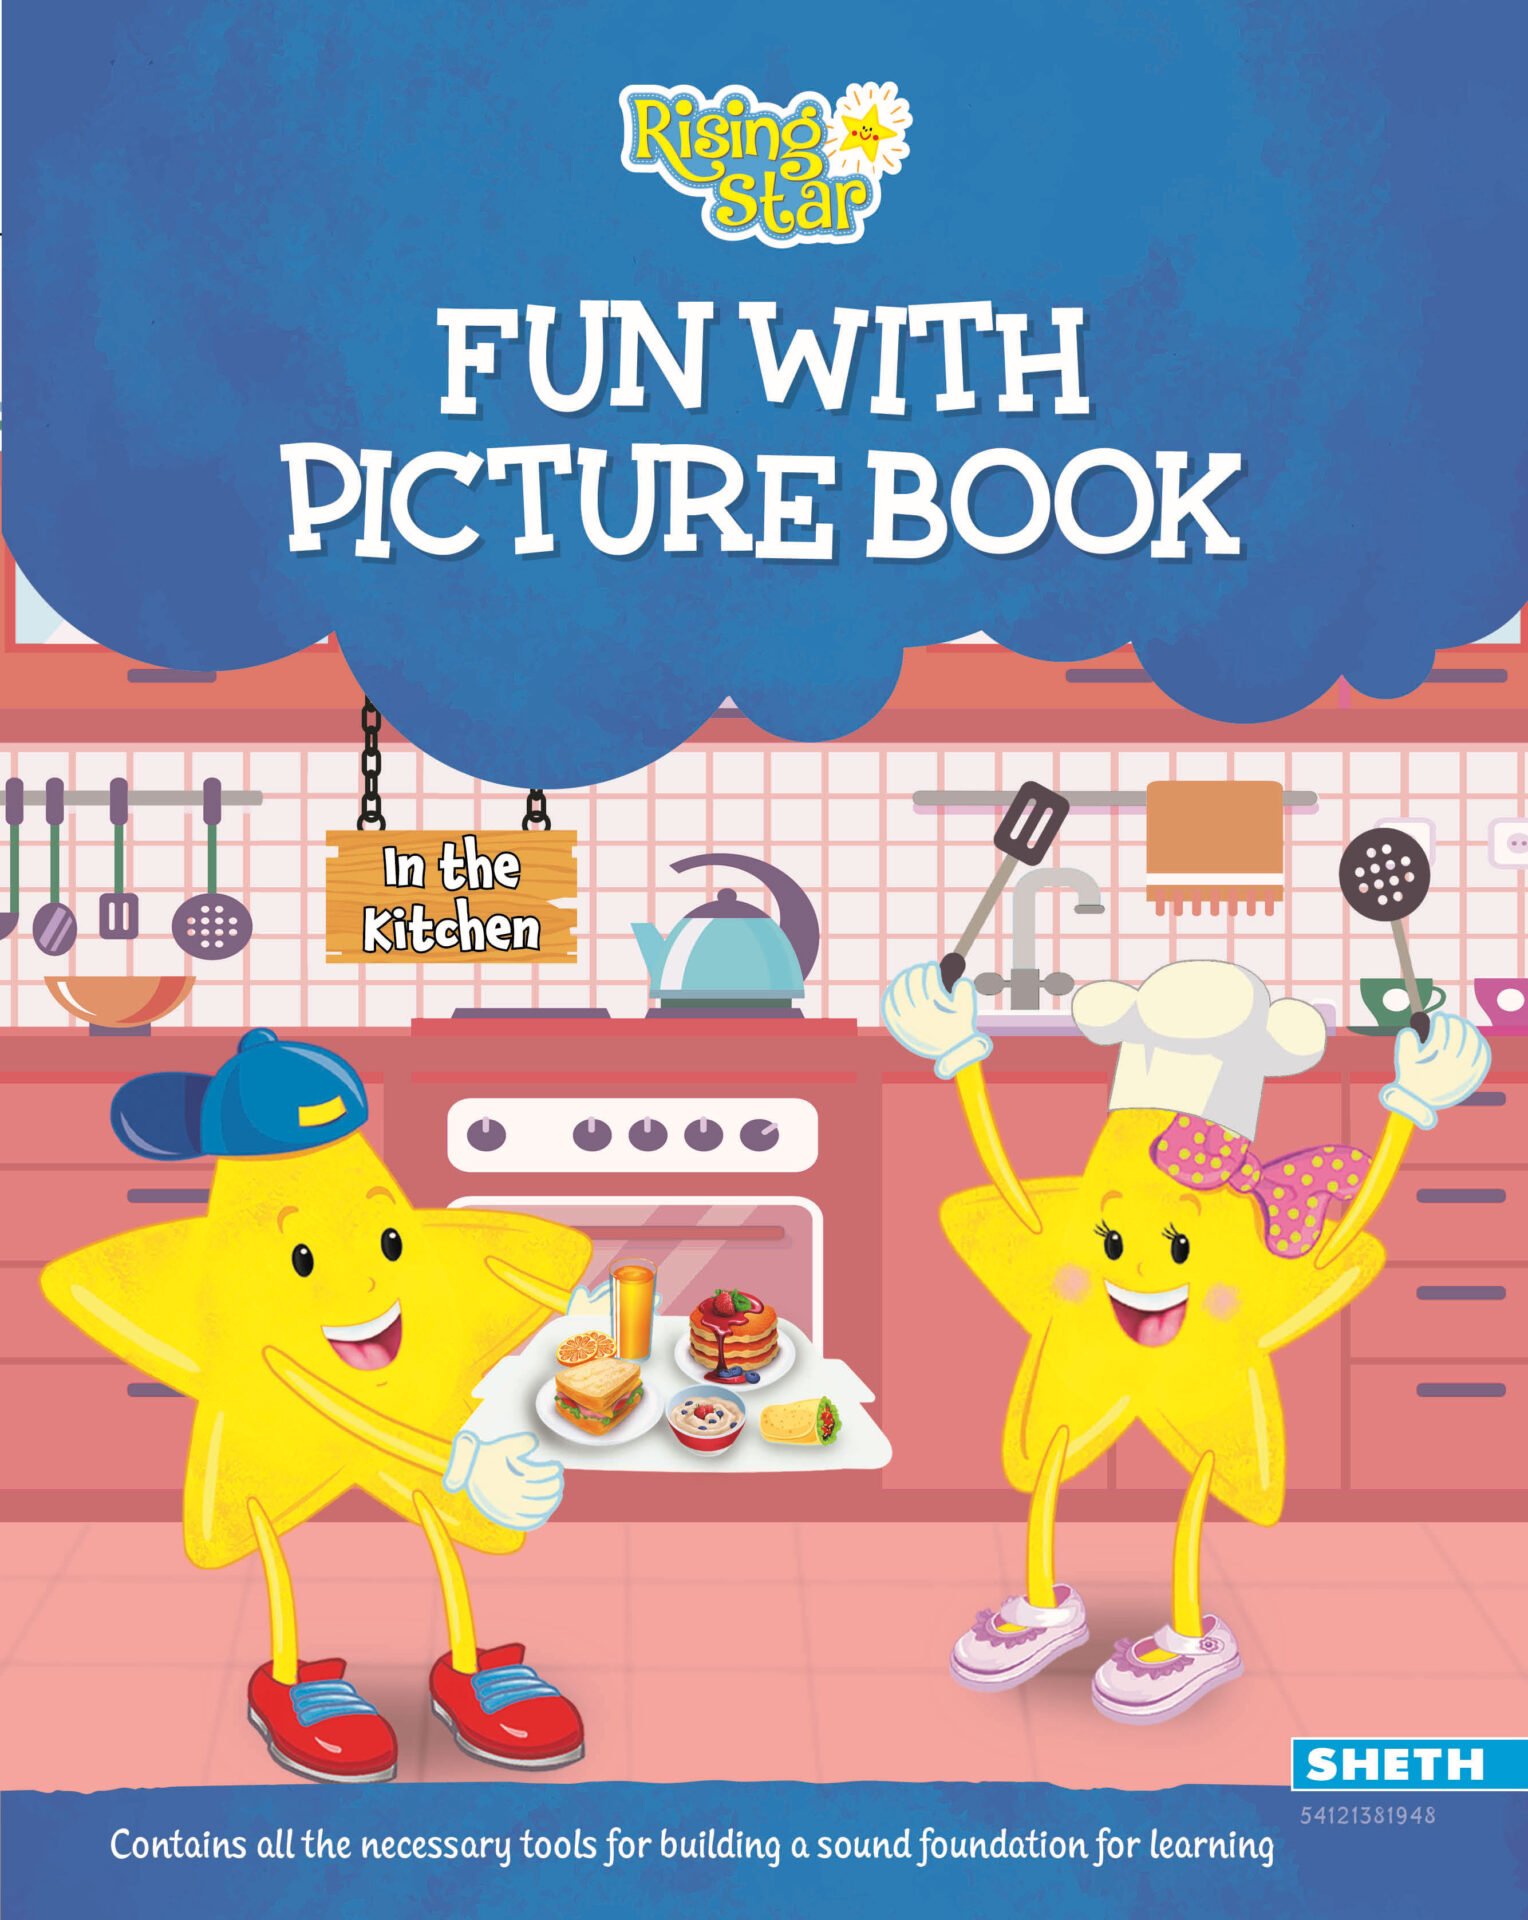 Rising Star Fun with Picture Book 1 1